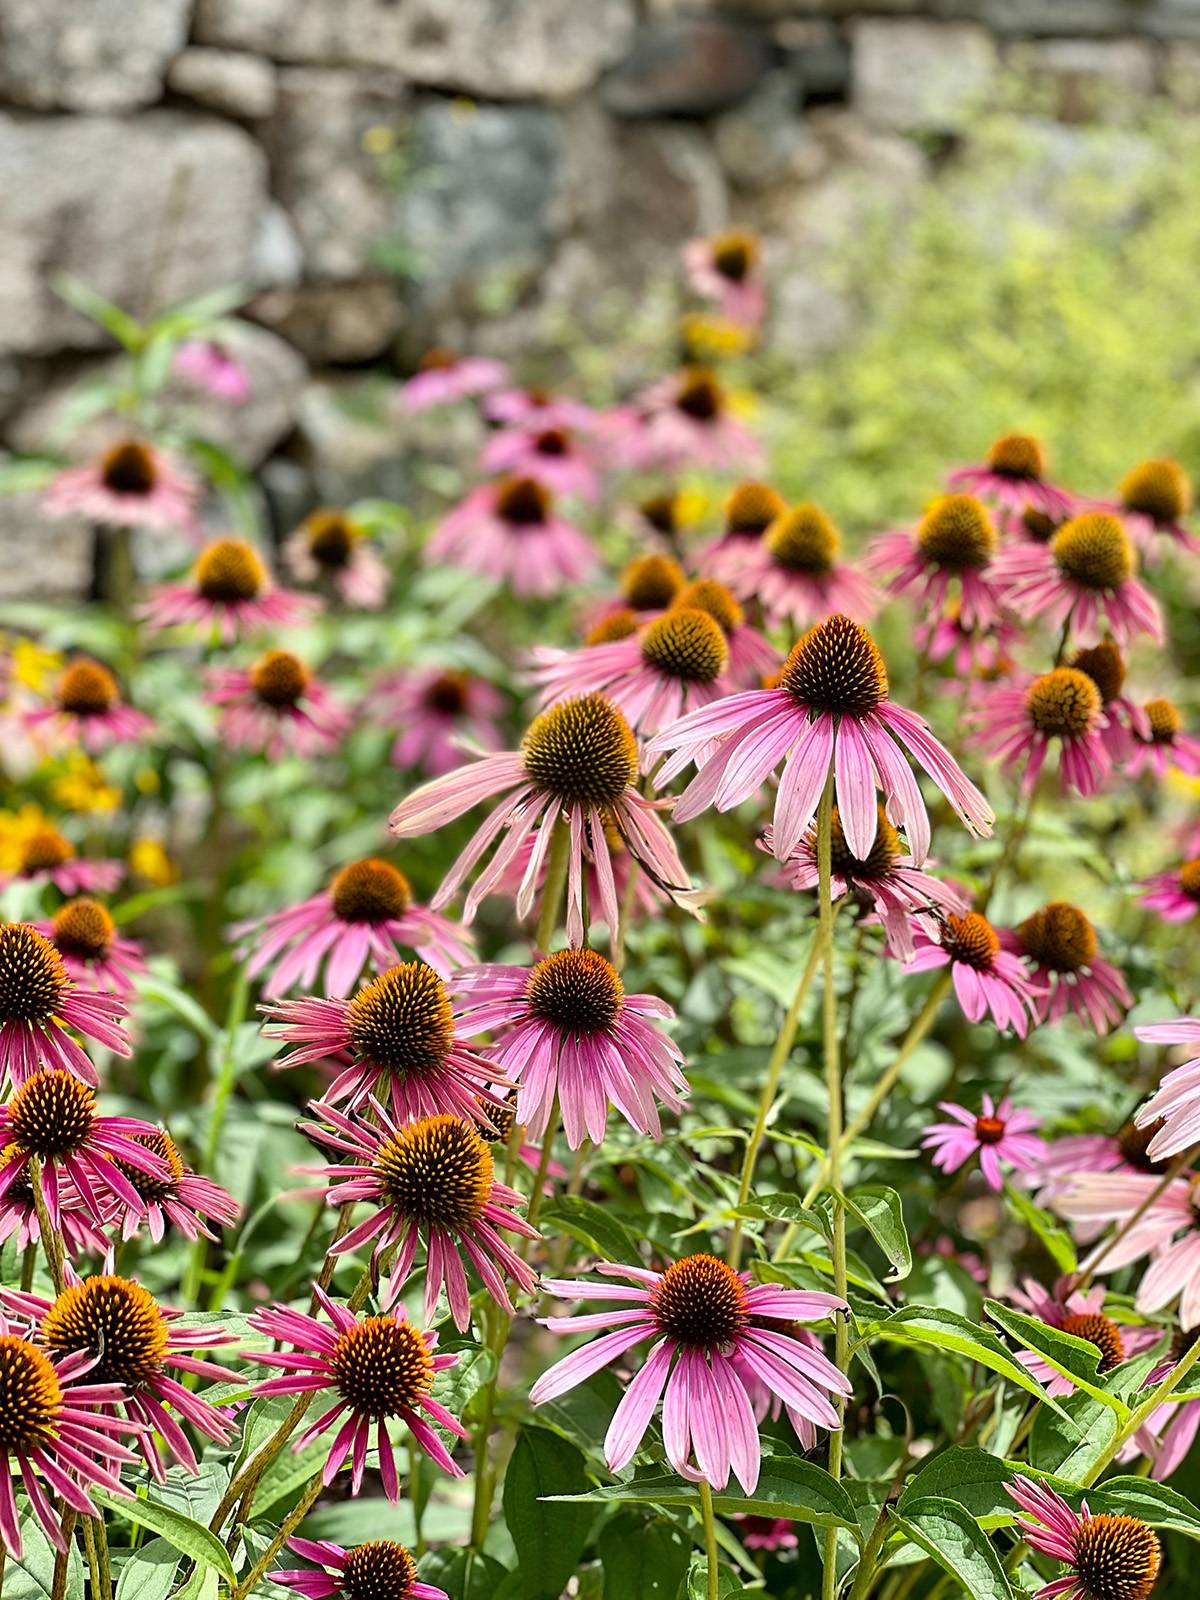 Coneflower, also known as echinacea. 